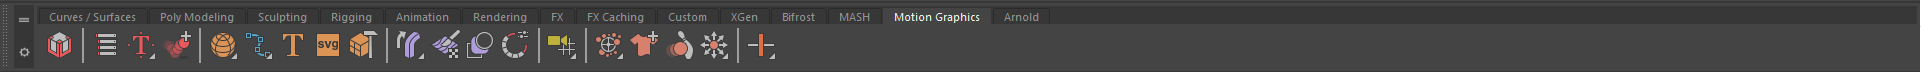 MotionGraphic.PNG